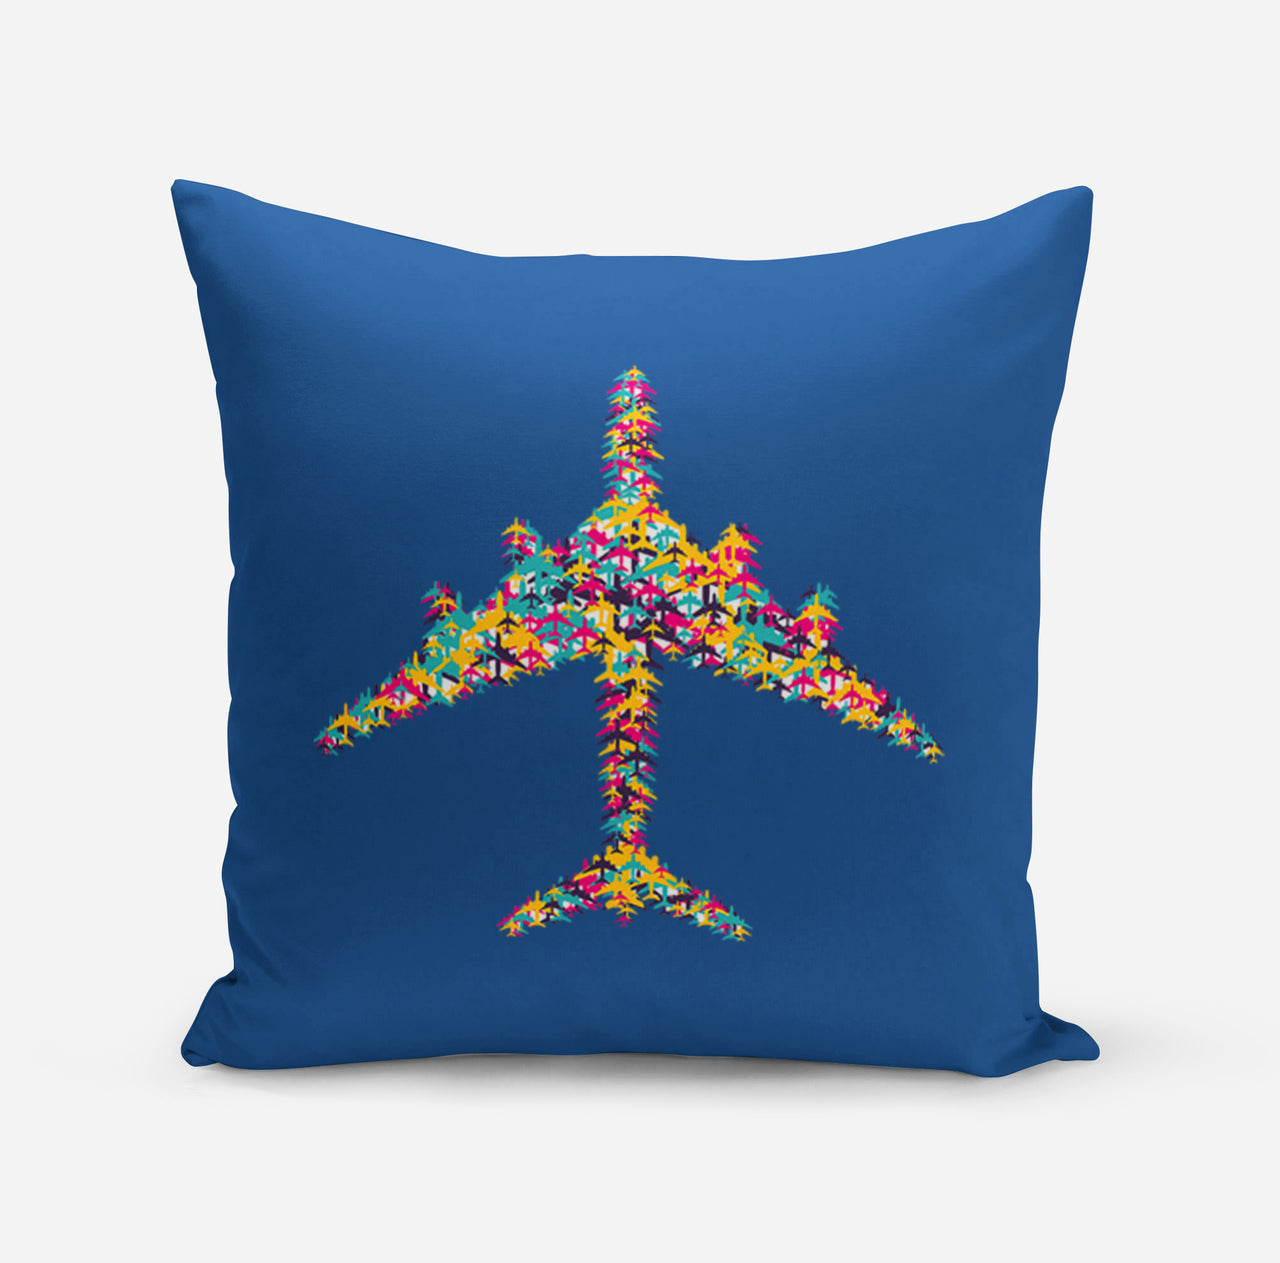 Colourful Airplane Designed Pillows